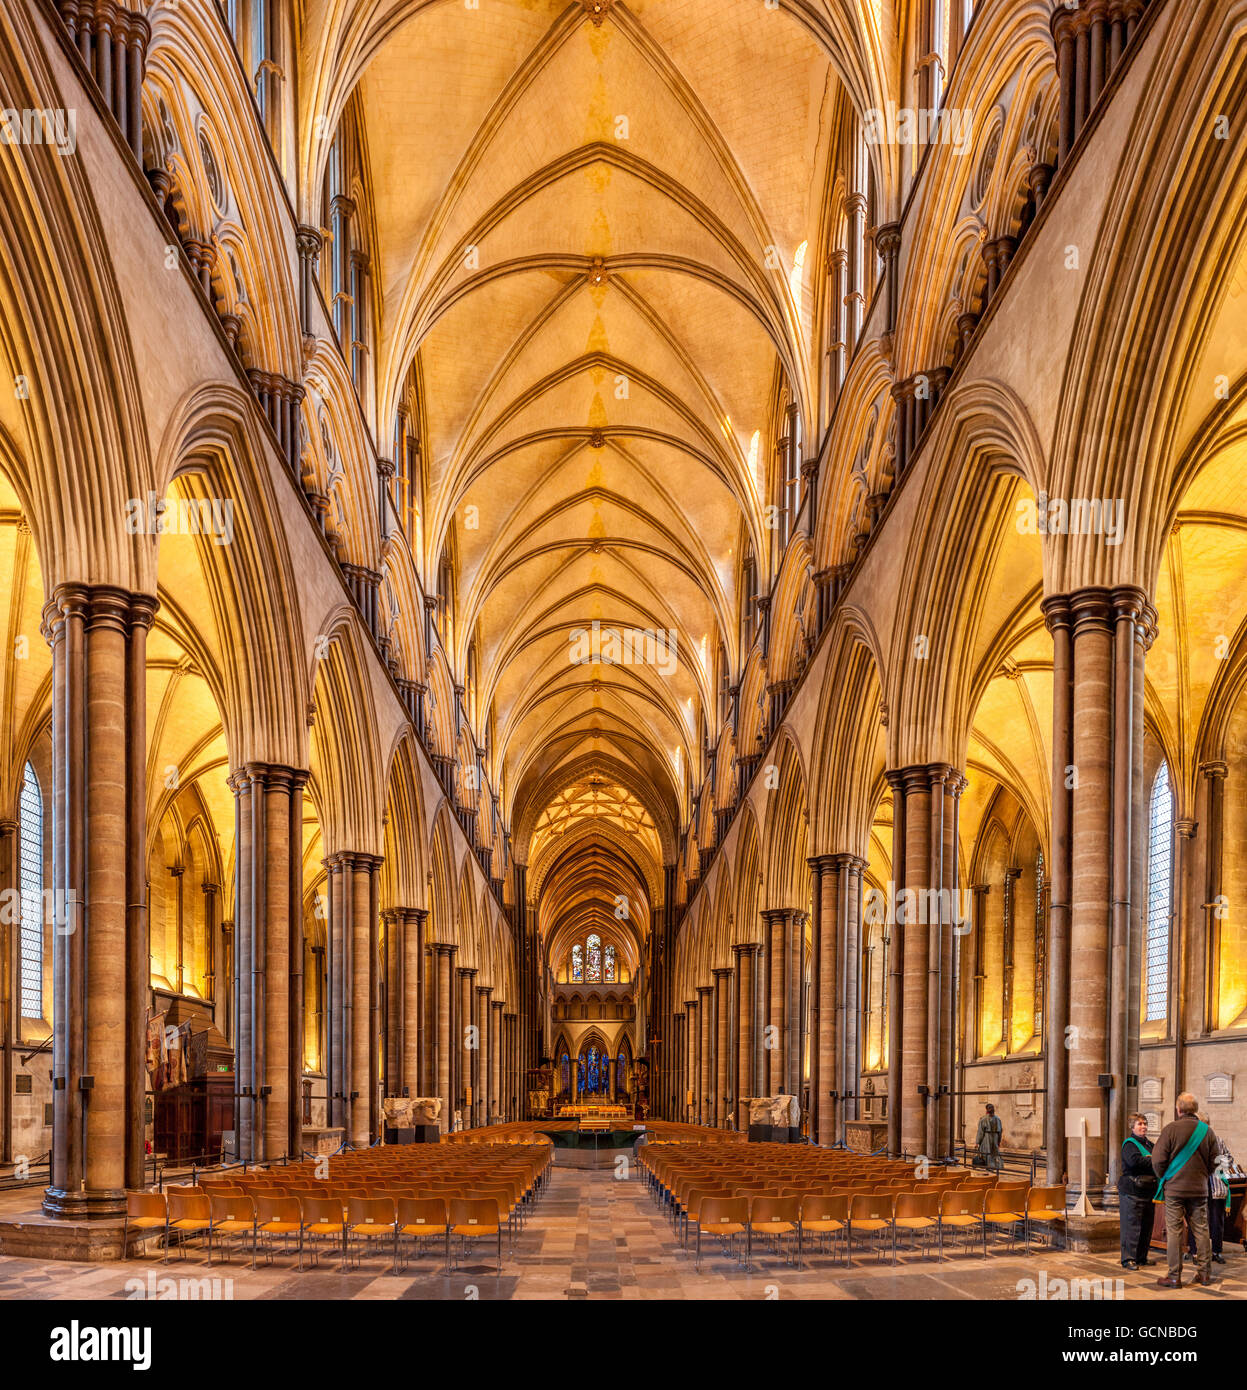 Inside the cathedral at Salisbury, home of the Magna Carta. Stock Photo